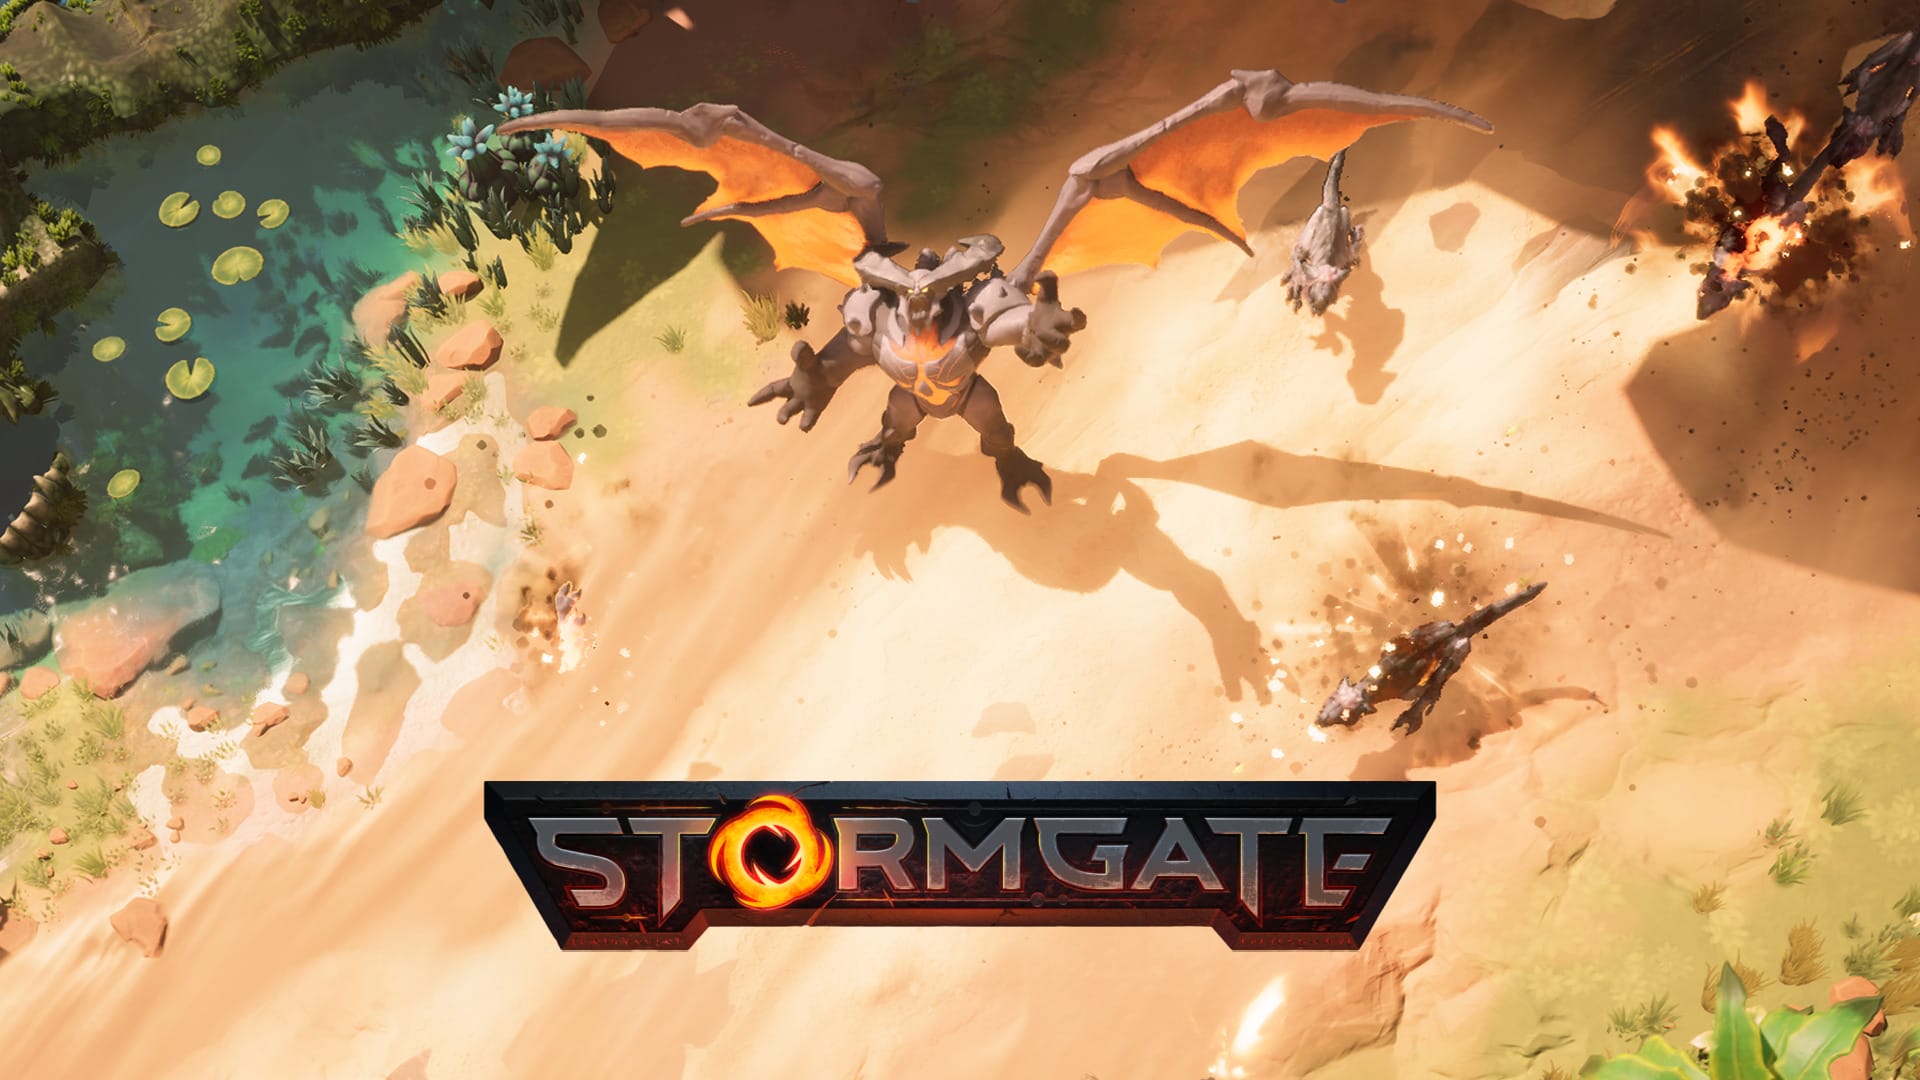 will stormgate have heroes